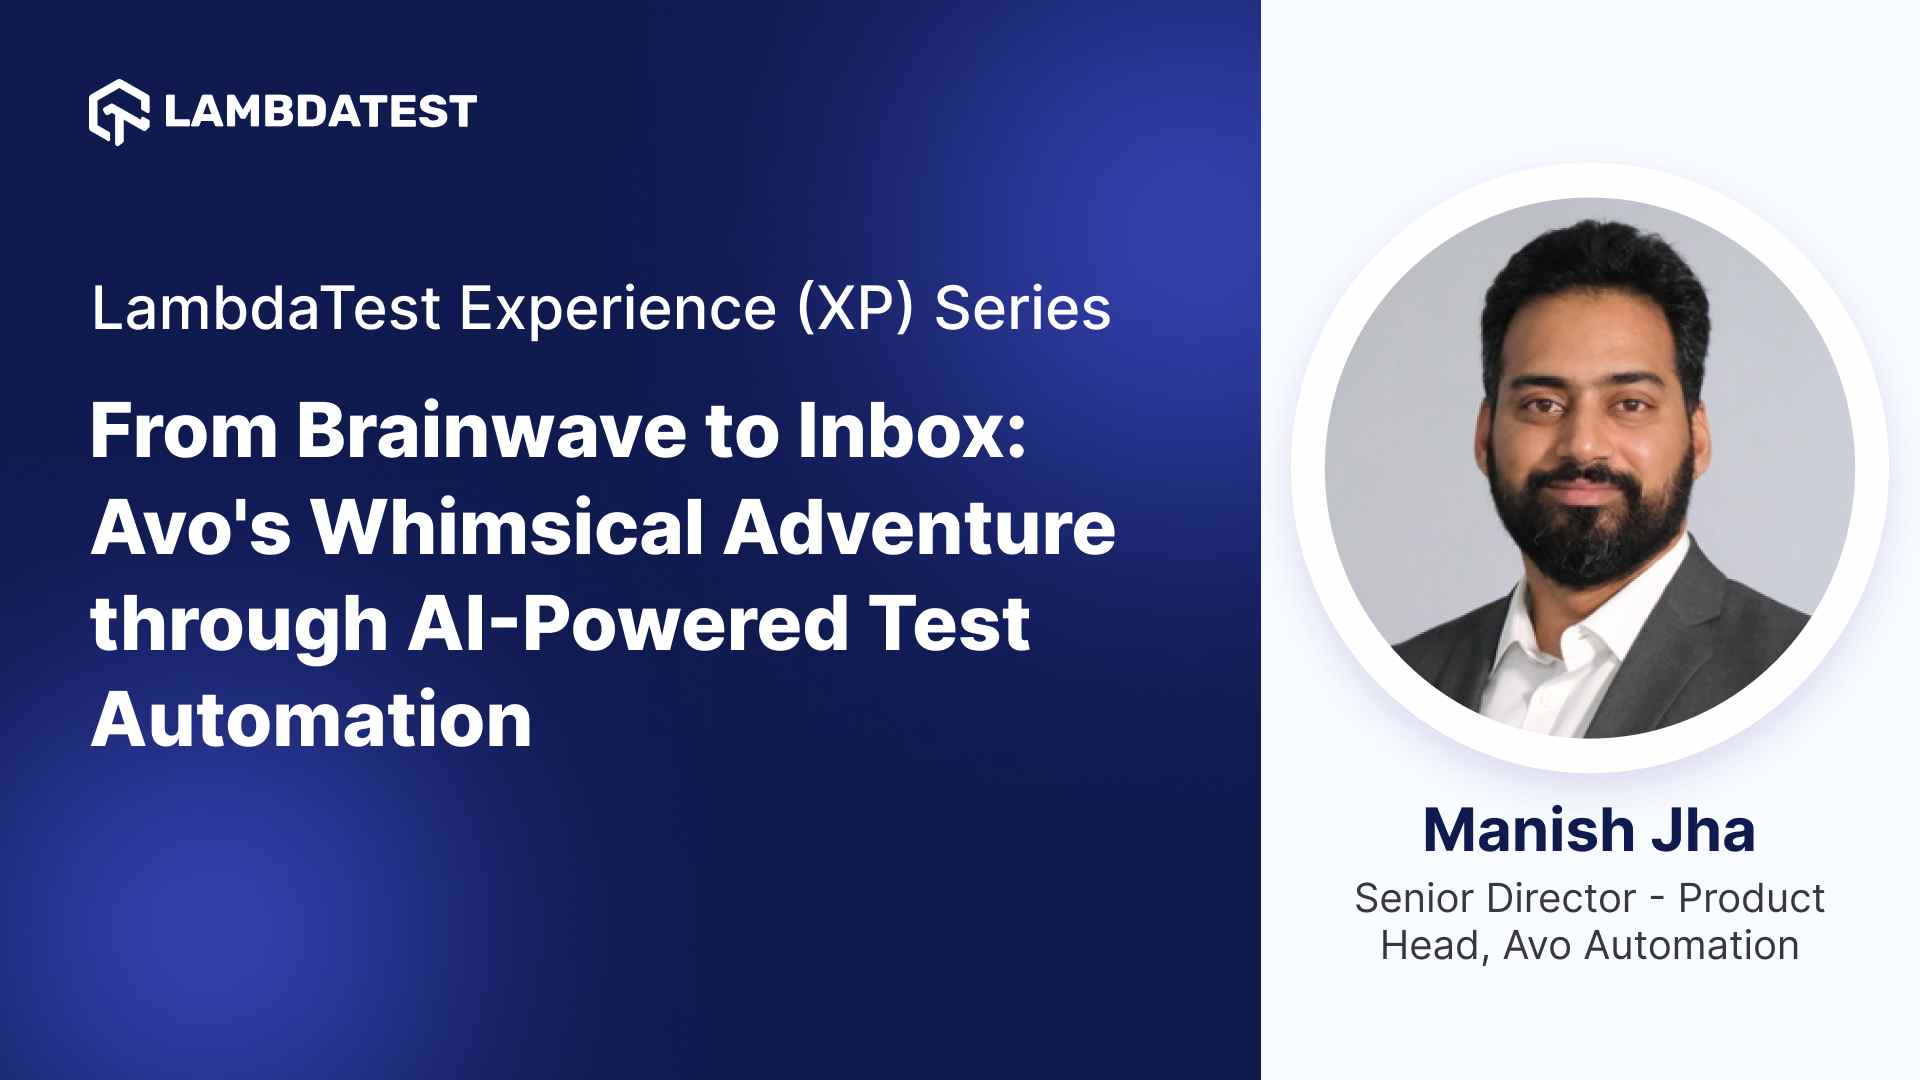 From Brainwave to Inbox: Avo's Whimsical Adventure through AI-Powered Test Automation